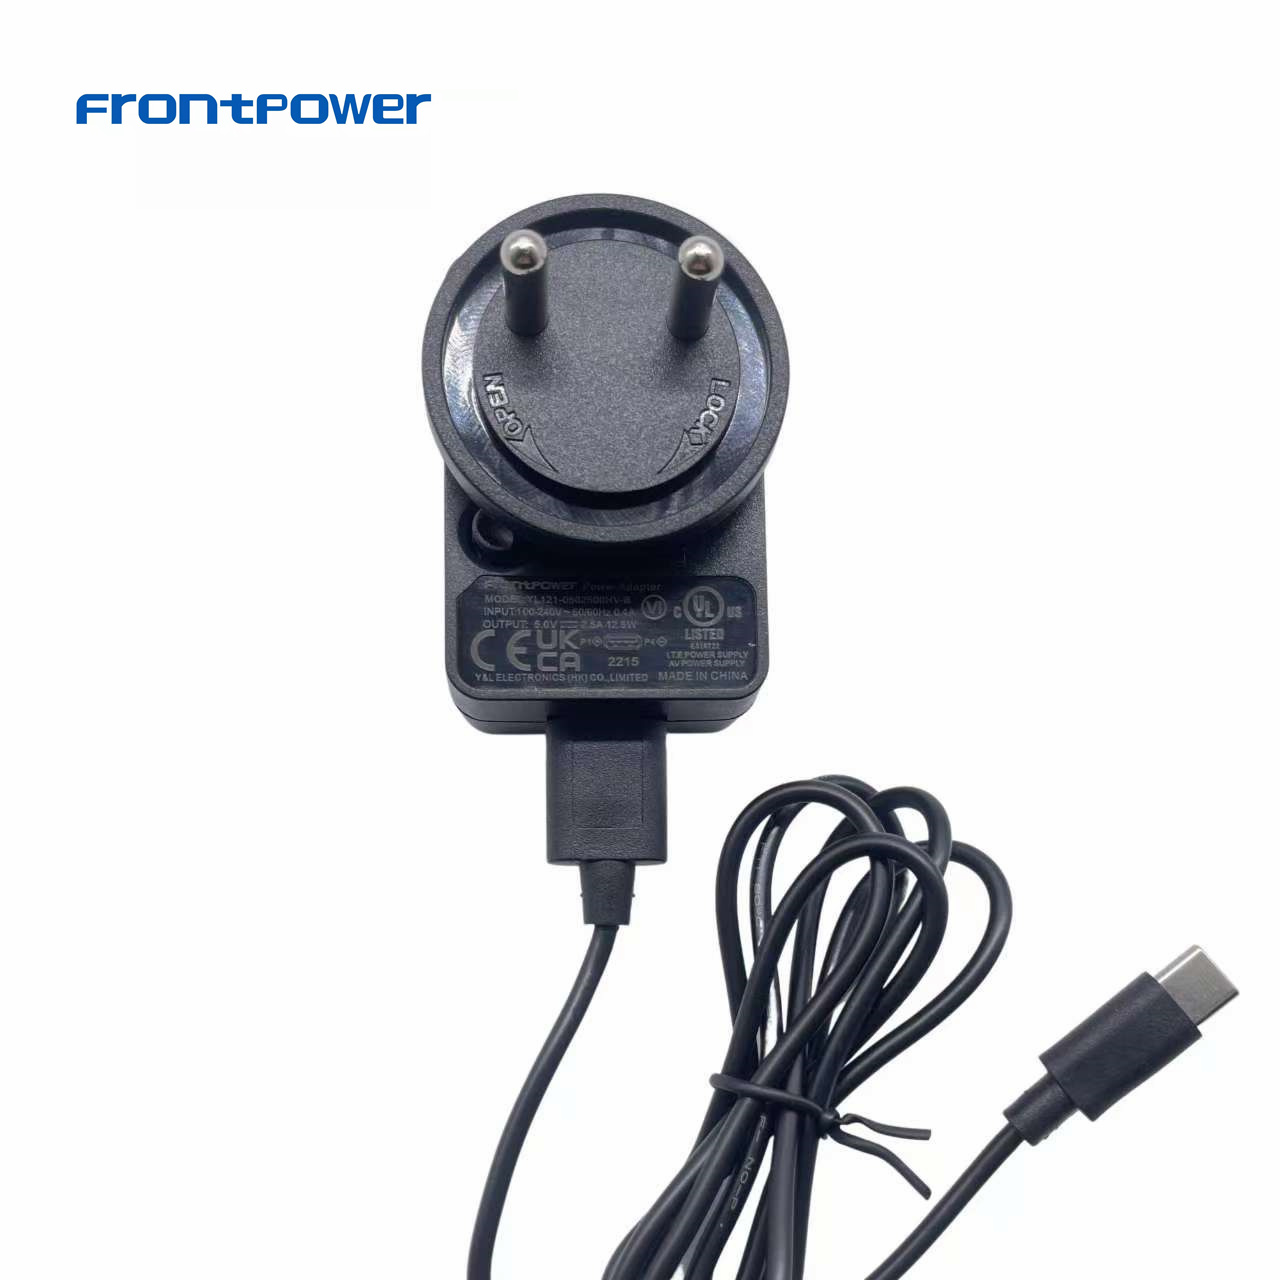 5v 2.5a detachable type bis power adapter with BIS certification for Indian market